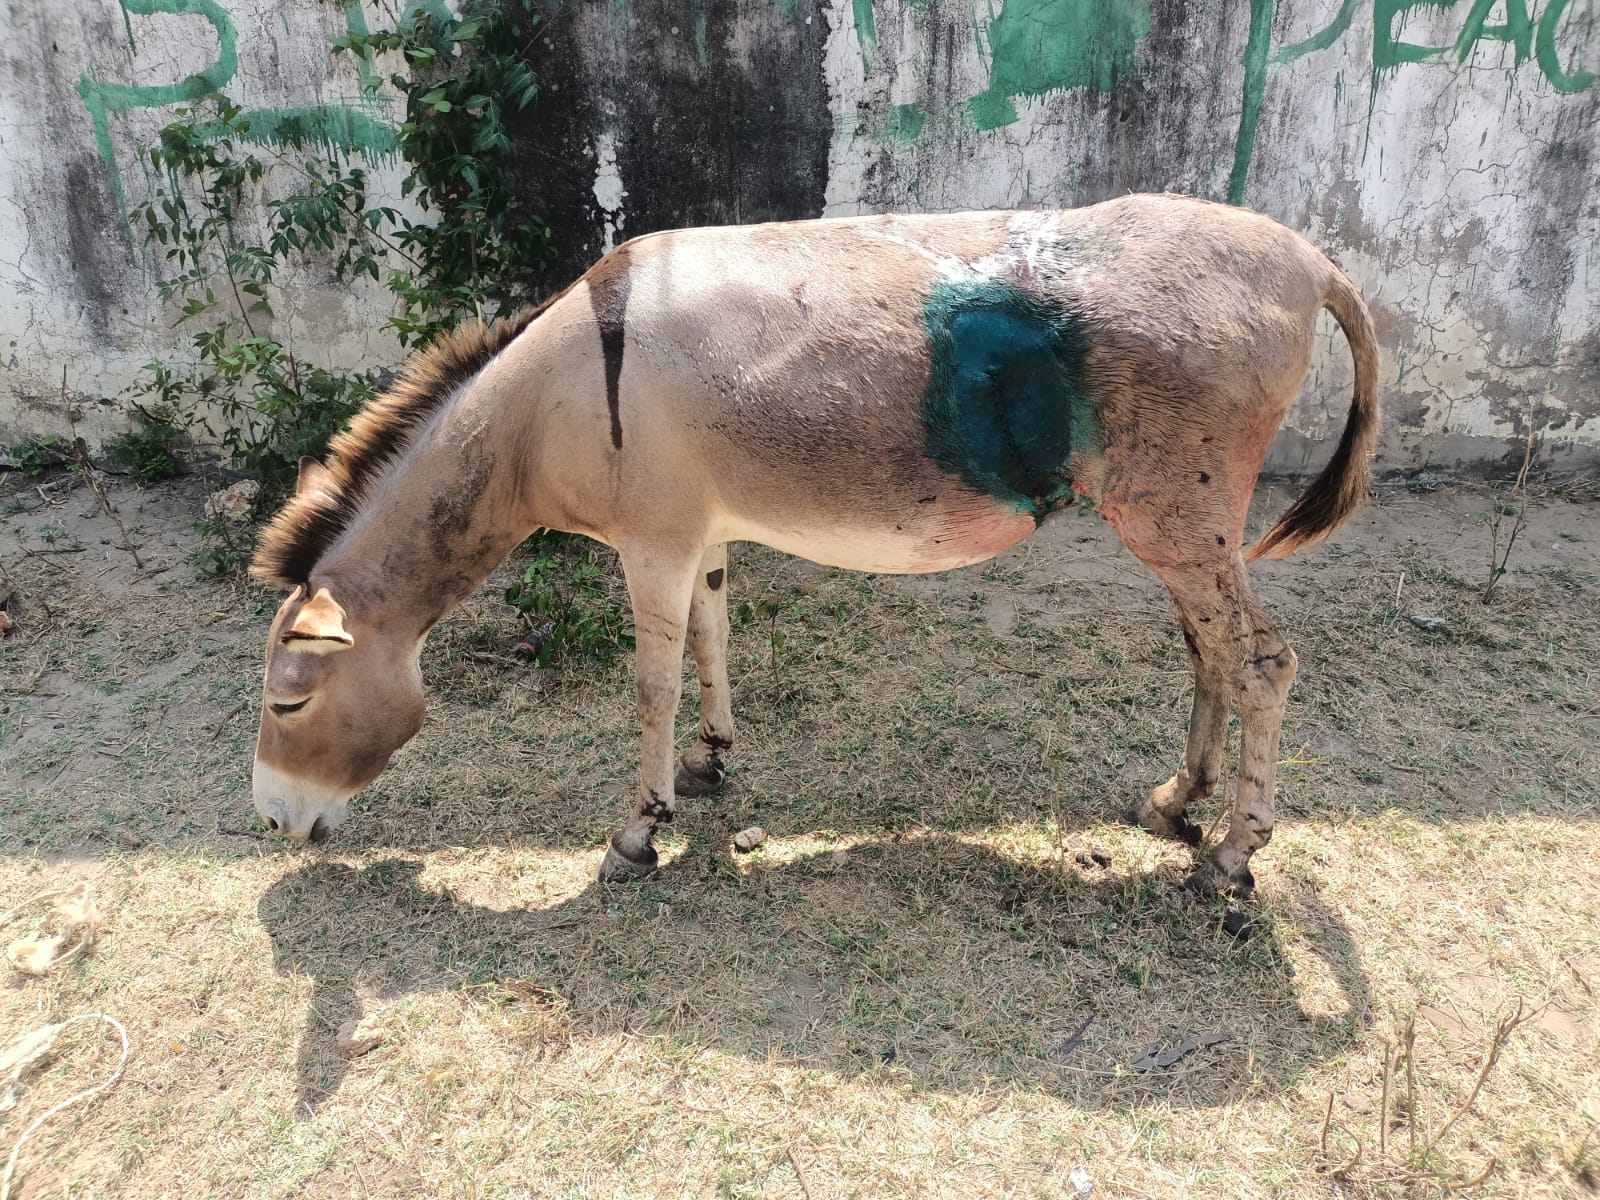 LAMU COUNTY CONDUCTS THE FIRST EVER CEASERIAN SECTION IN A DONKEY